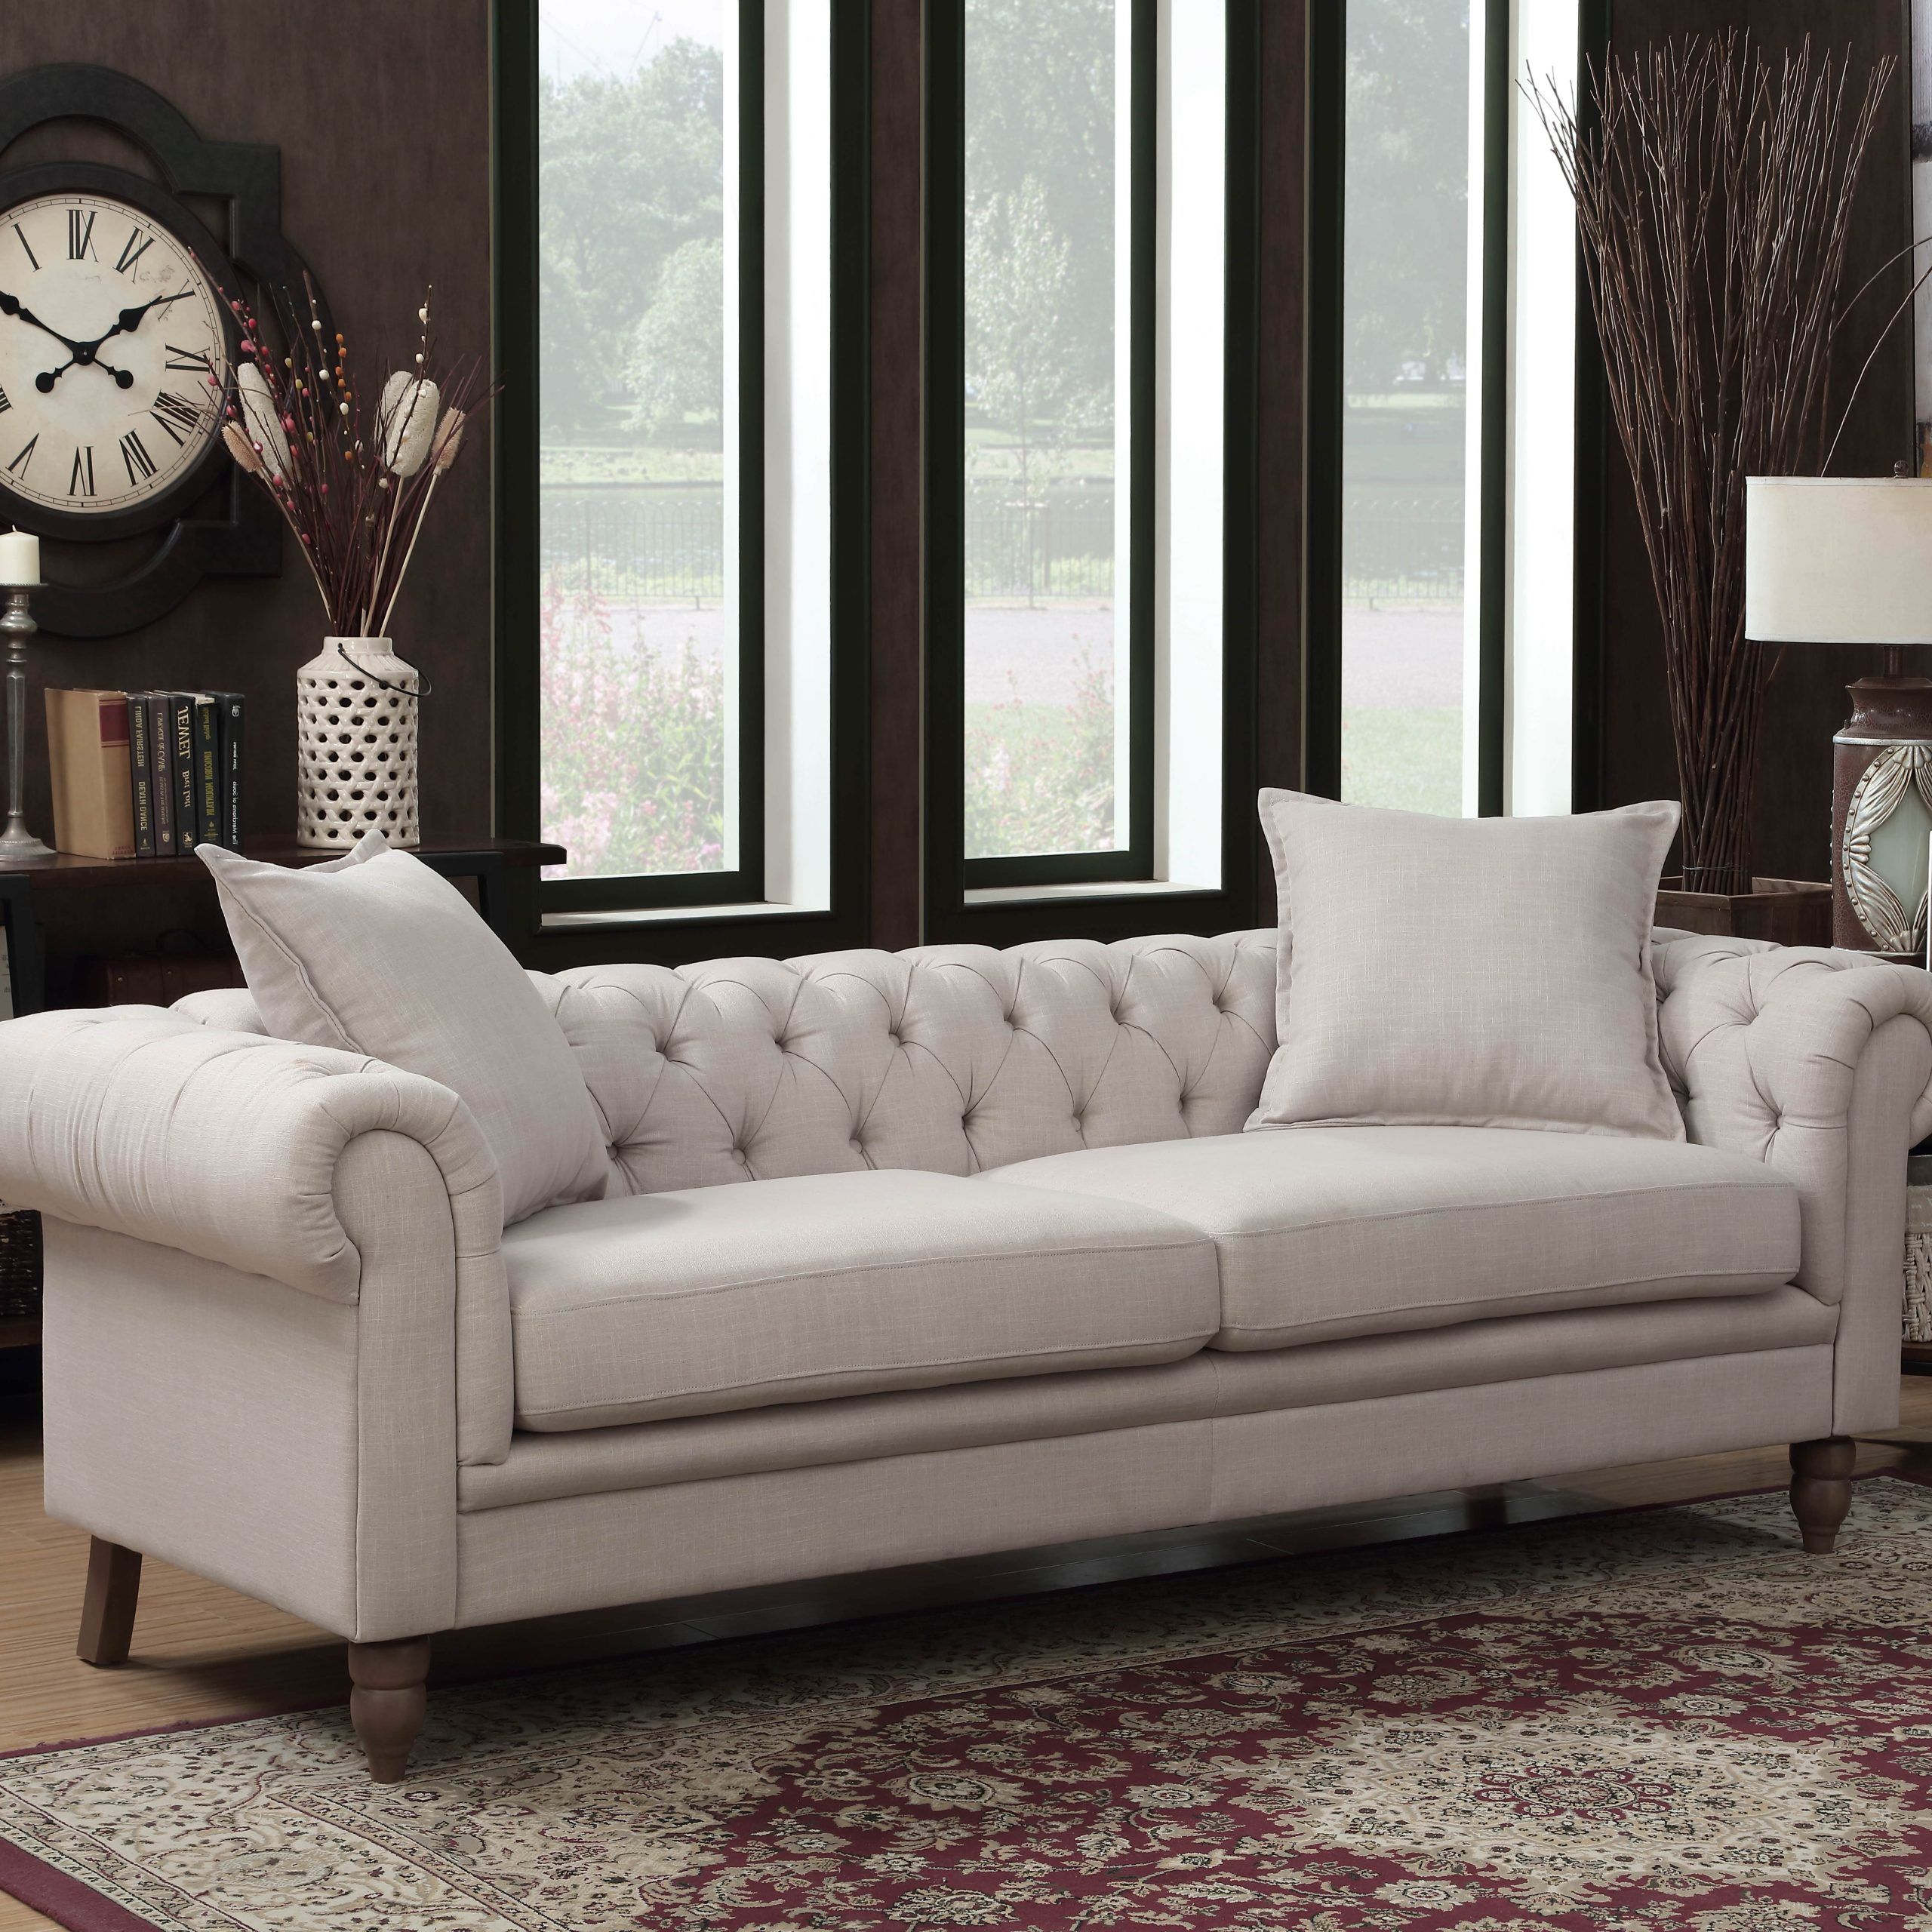 Tufted Upholstered Sofas Regarding Most Recent Juliet Collection Contemporary Linen Fabric Upholstered Button Tufted (View 10 of 15)